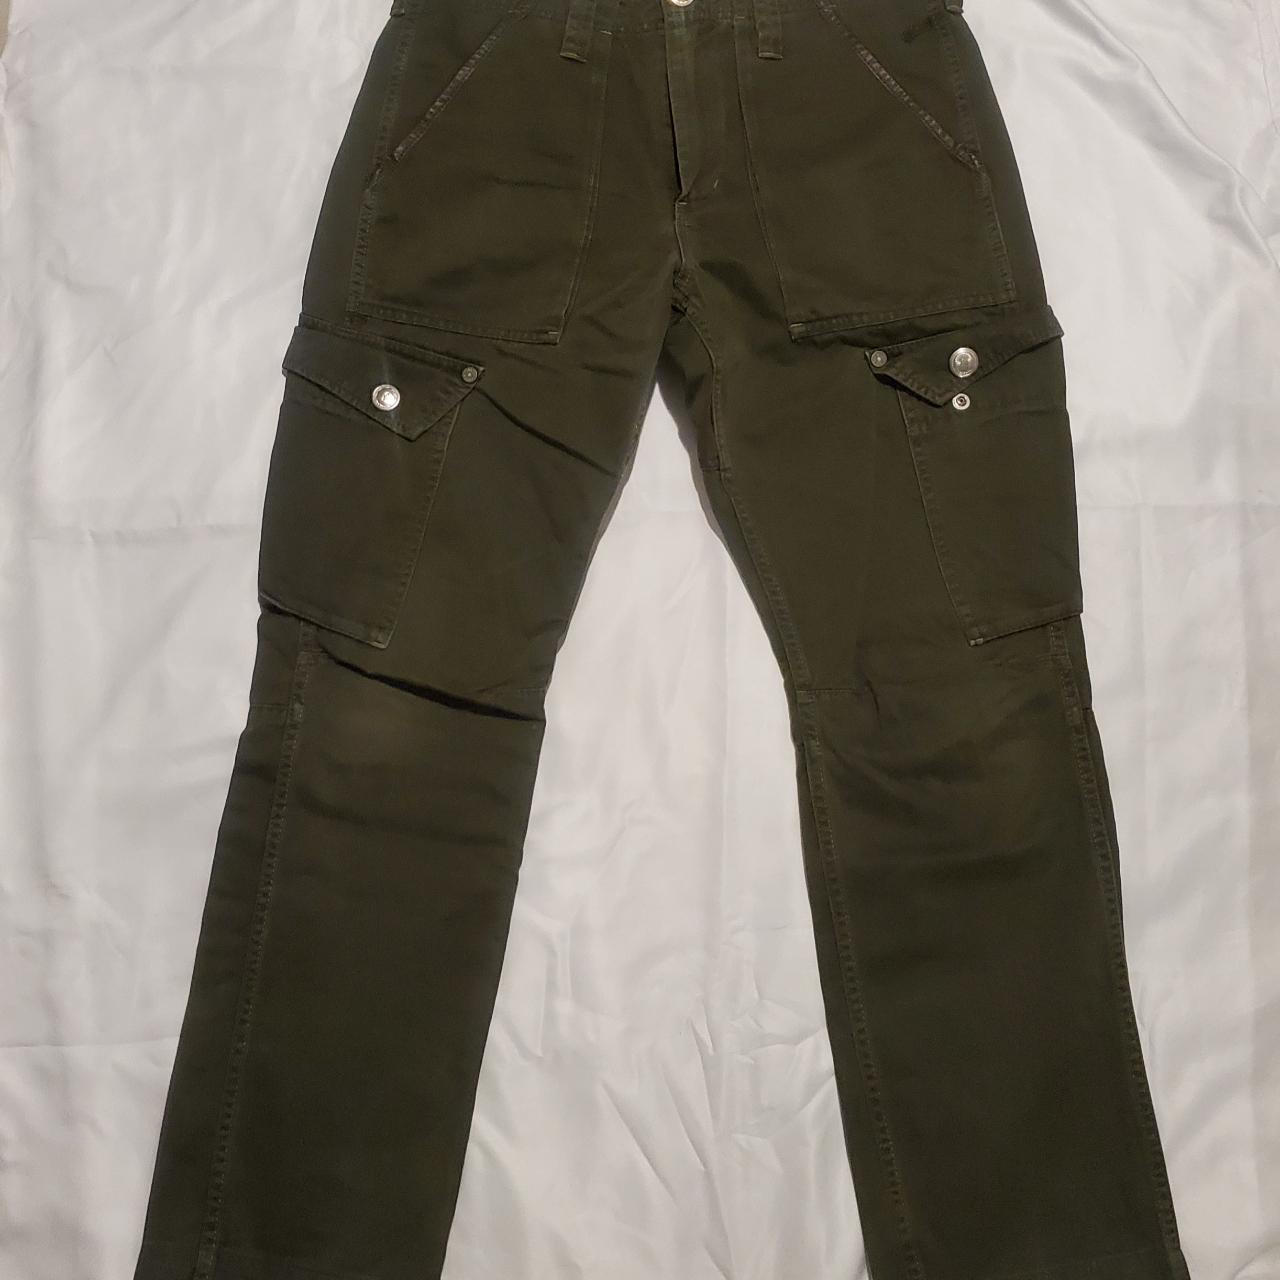 Edwin Vintage Cargo Pants with Leather Trimmed... - Depop